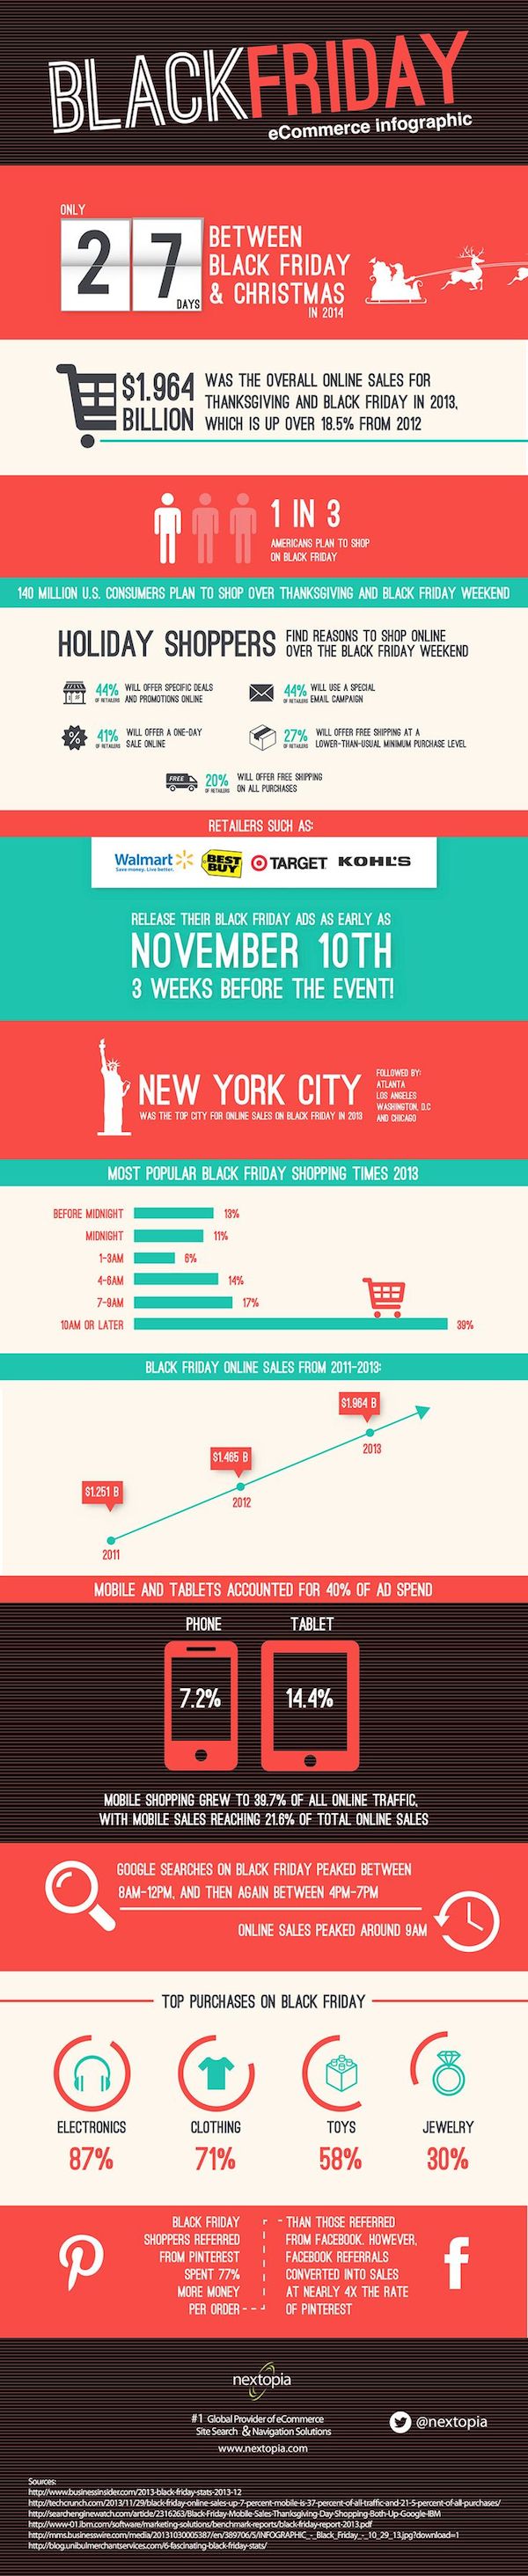 20 Black Friday And Cyber Monday Infographics image 21.jpg1